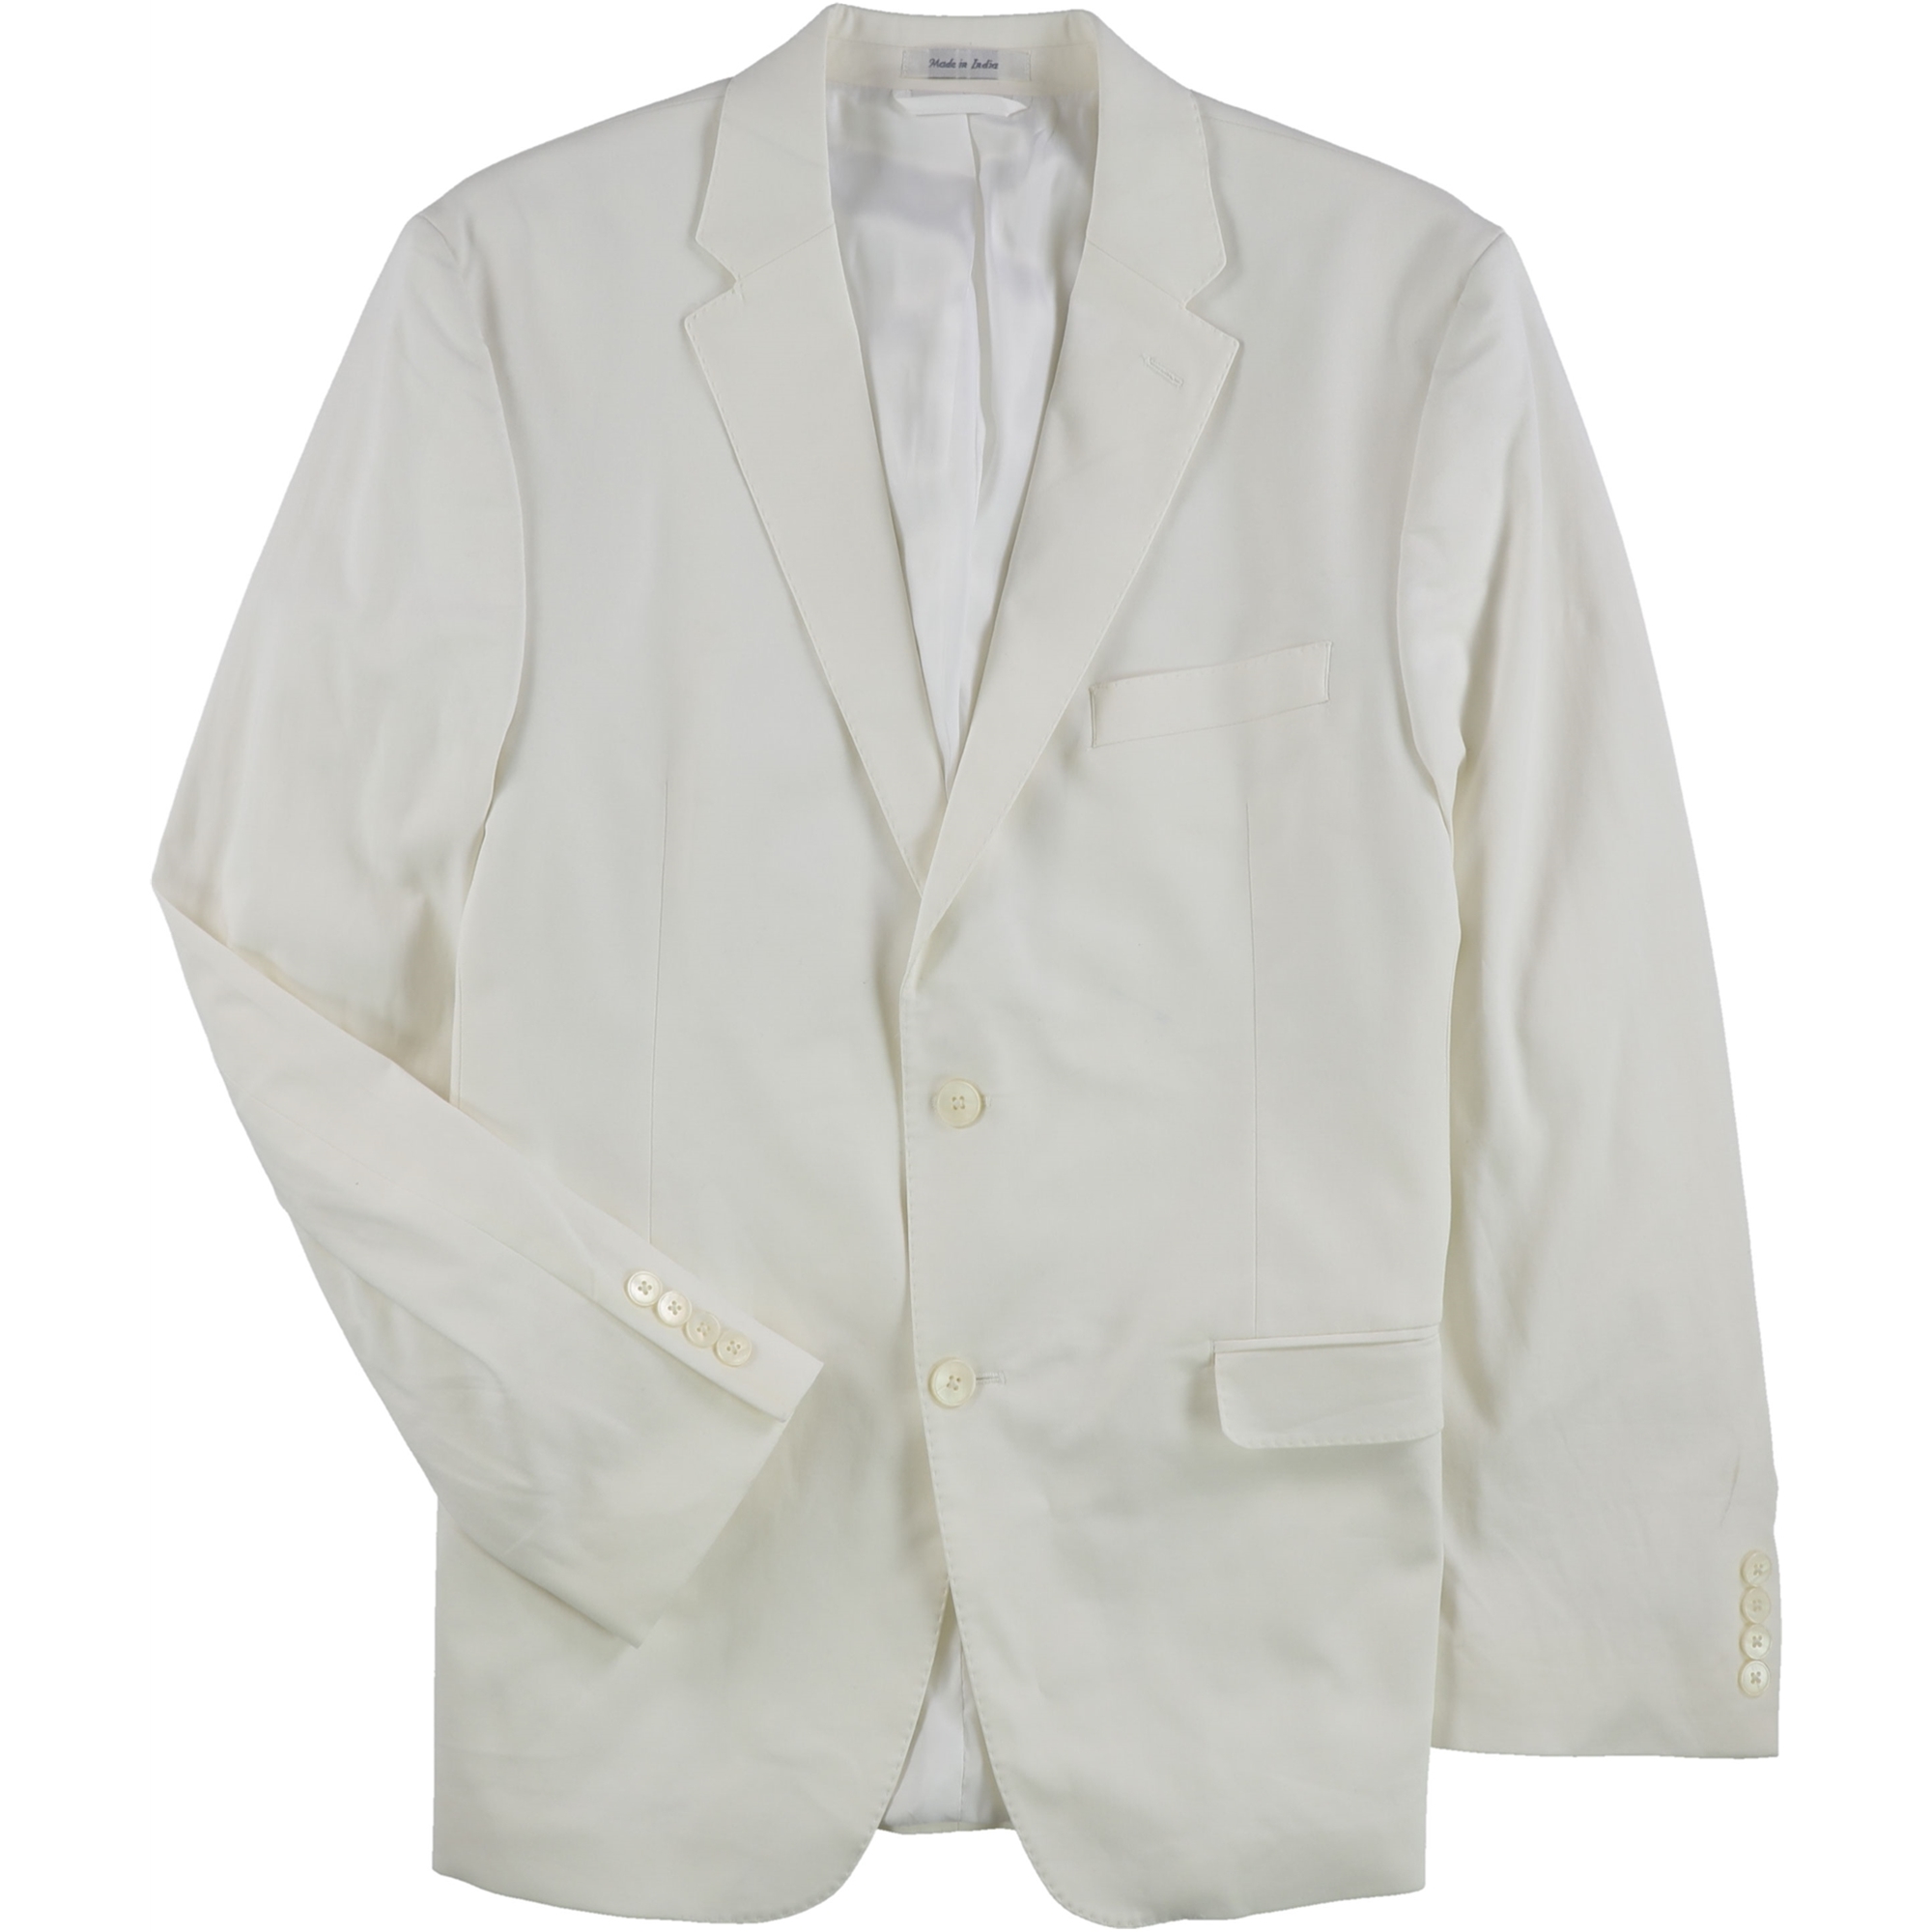 Ralph Lauren Mens Ultraflex Two Button Formal Suit white 43/Unfinished - image 2 of 2